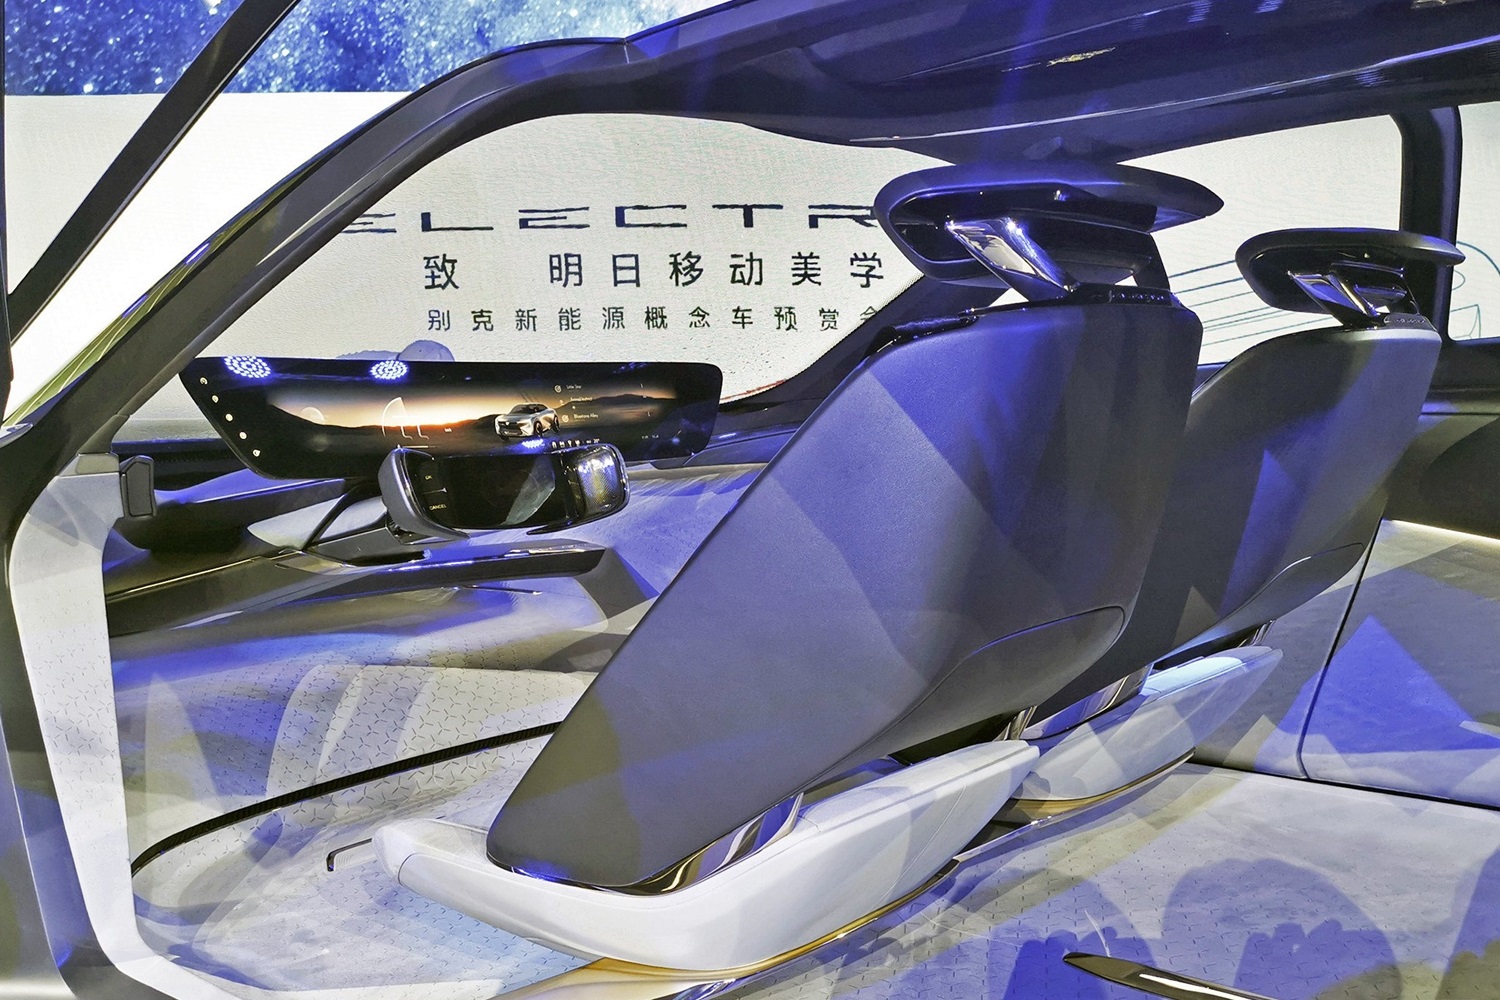 More Details About New Buick Electra Concept Revealed | GM Authority